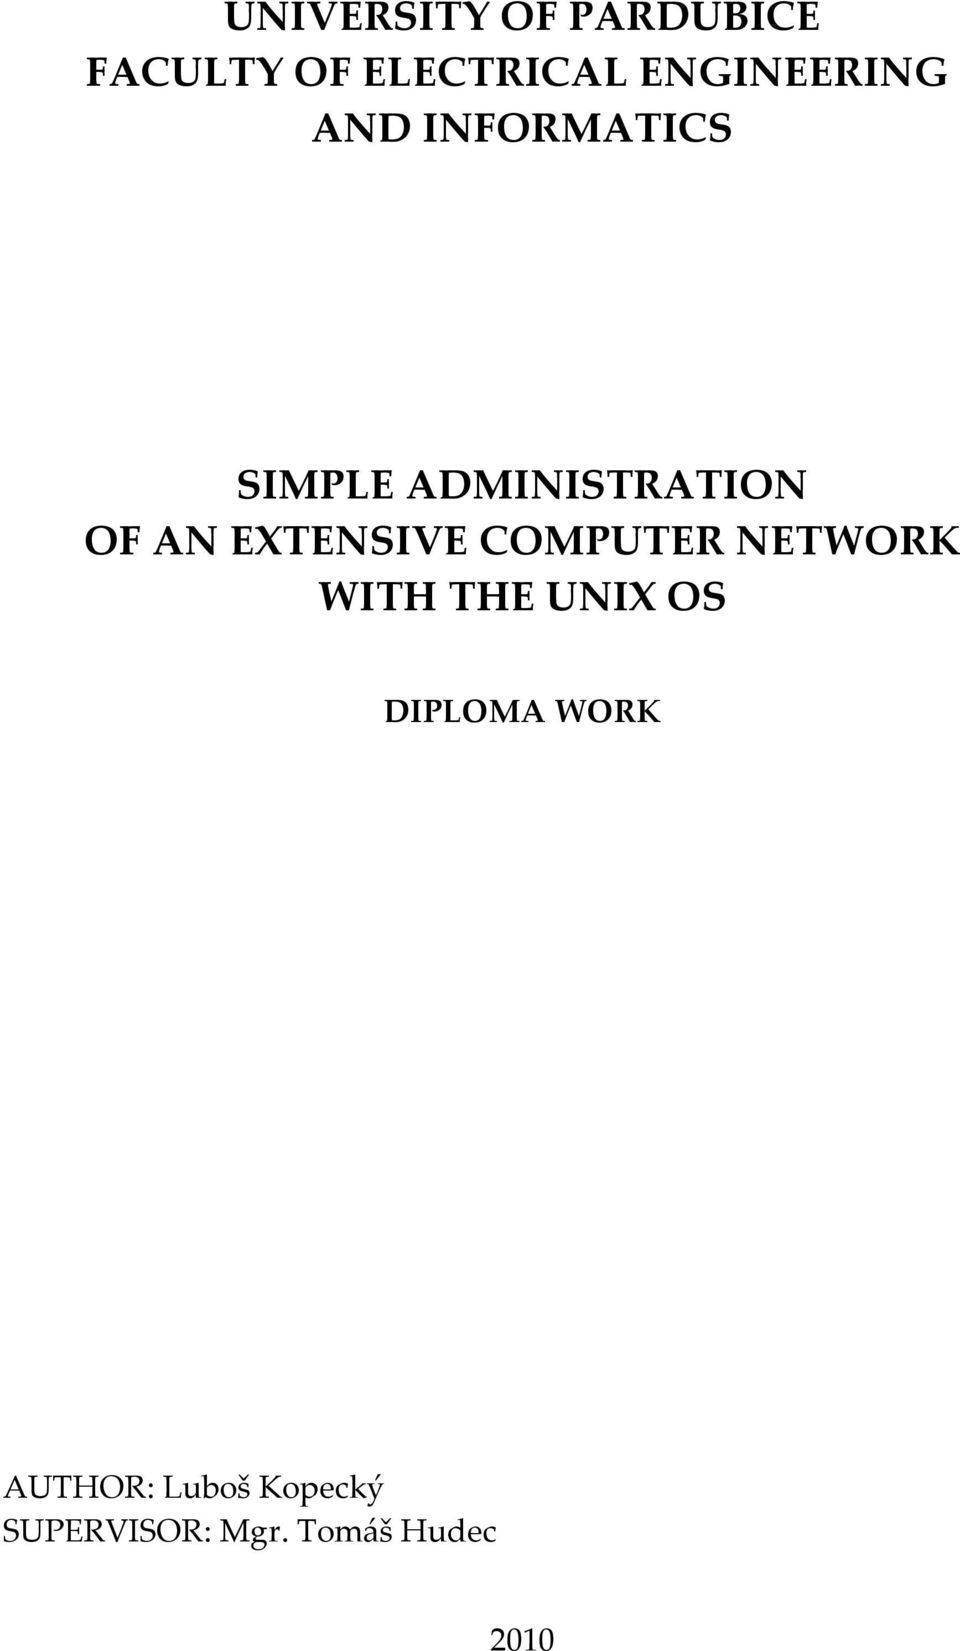 AN EXTENSIVE COMPUTER NETWORK WITH THE UNIX OS